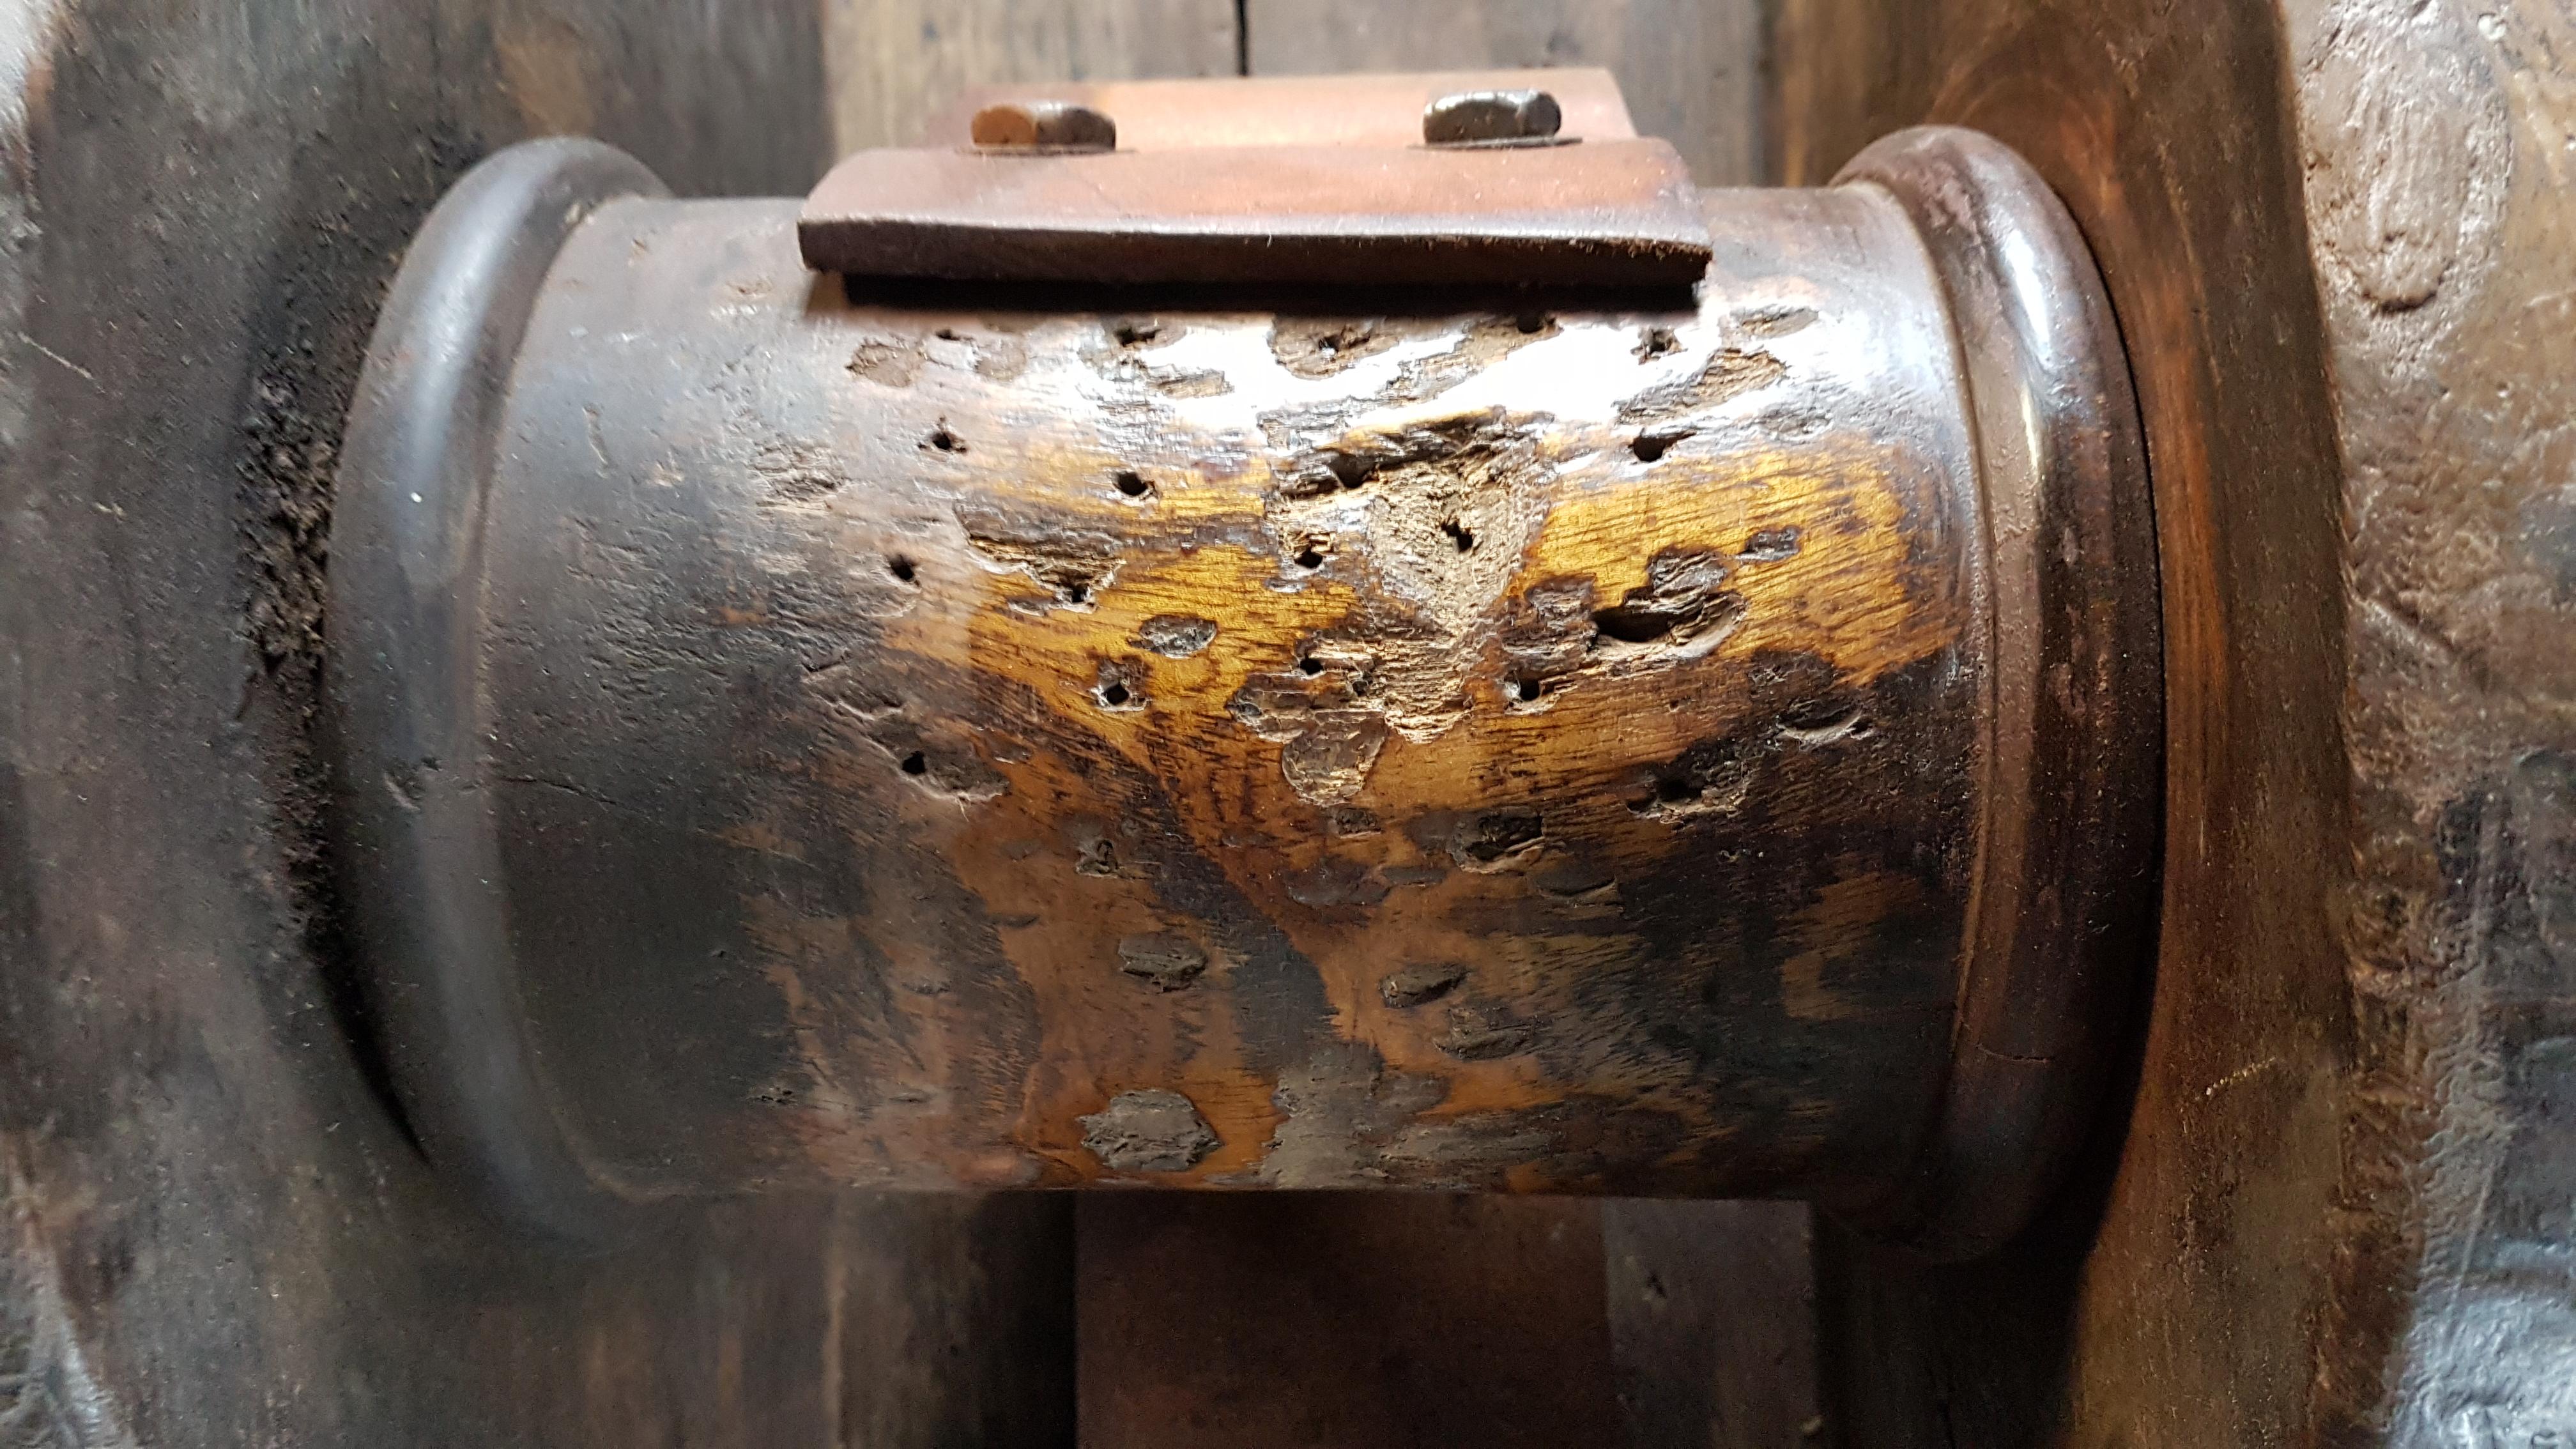 An early 19th century gold drawerer from the Aston Works in the Birmingham jewellery quarter. A rare and primitive survivor with the large hand cranked wheel that turns and elm barrel with the leather strap rolled around that. The roll of gold or